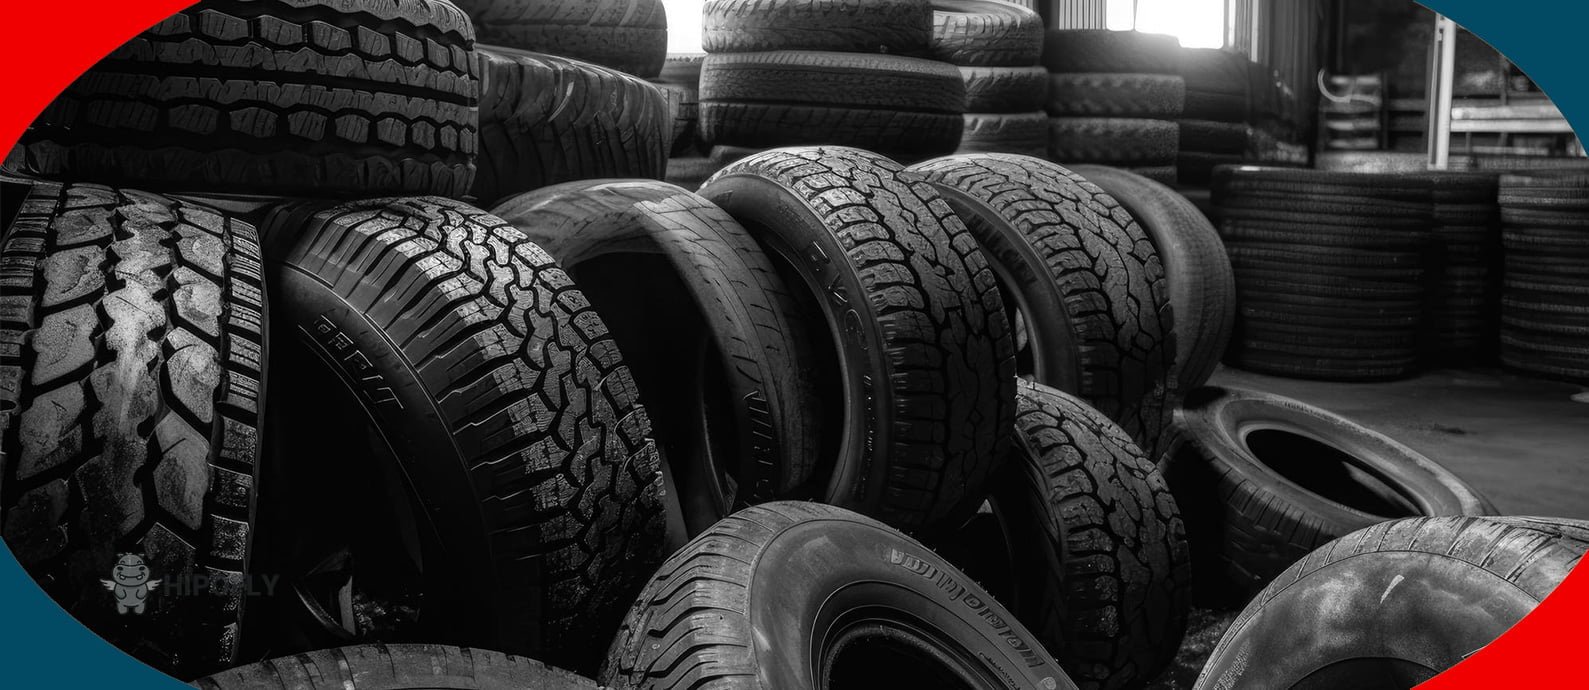 ship tire from China to Worldwide